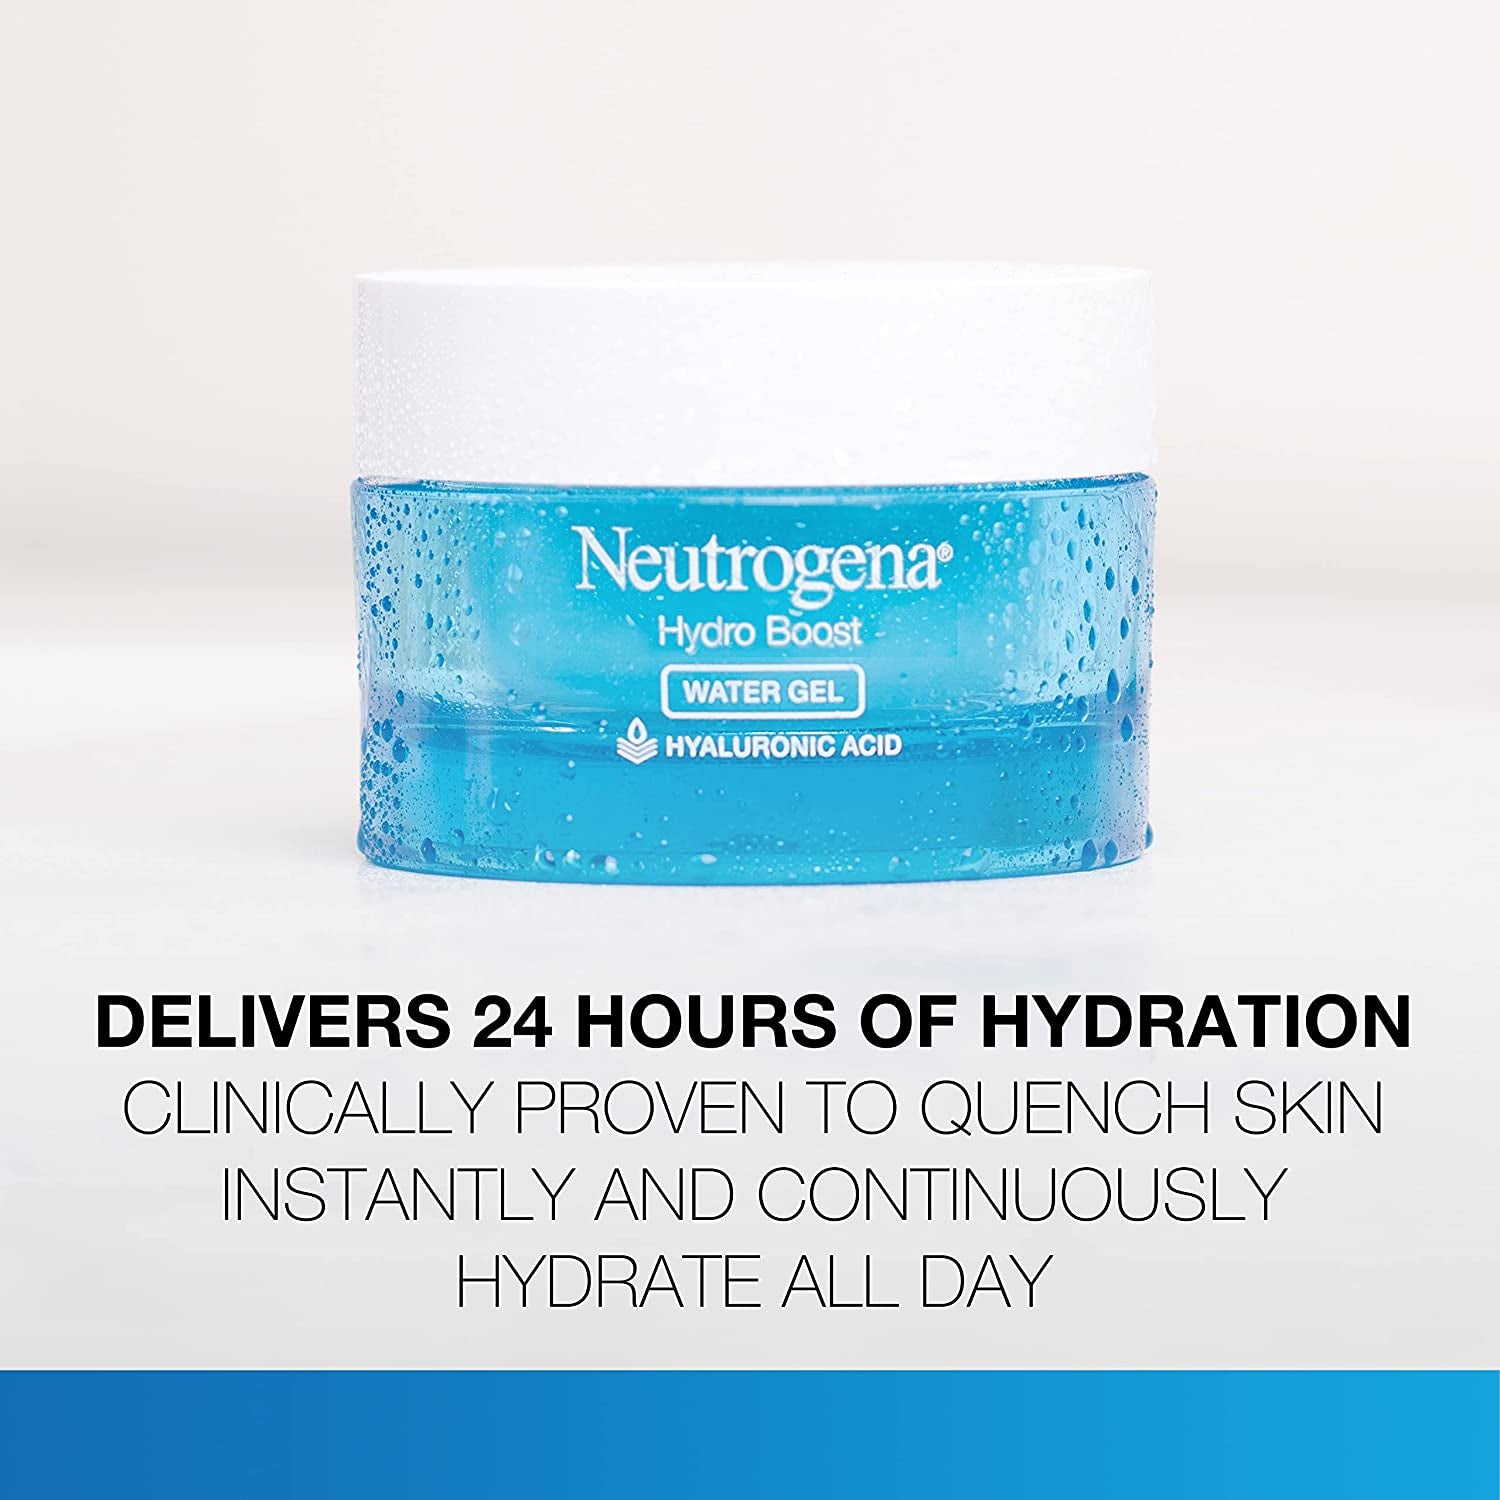 Neutrogena - Daily Face Moisturizer Hydro Boost Hyaluronic Acid Hydrating Water Gel - Oil-Free Face Lotion